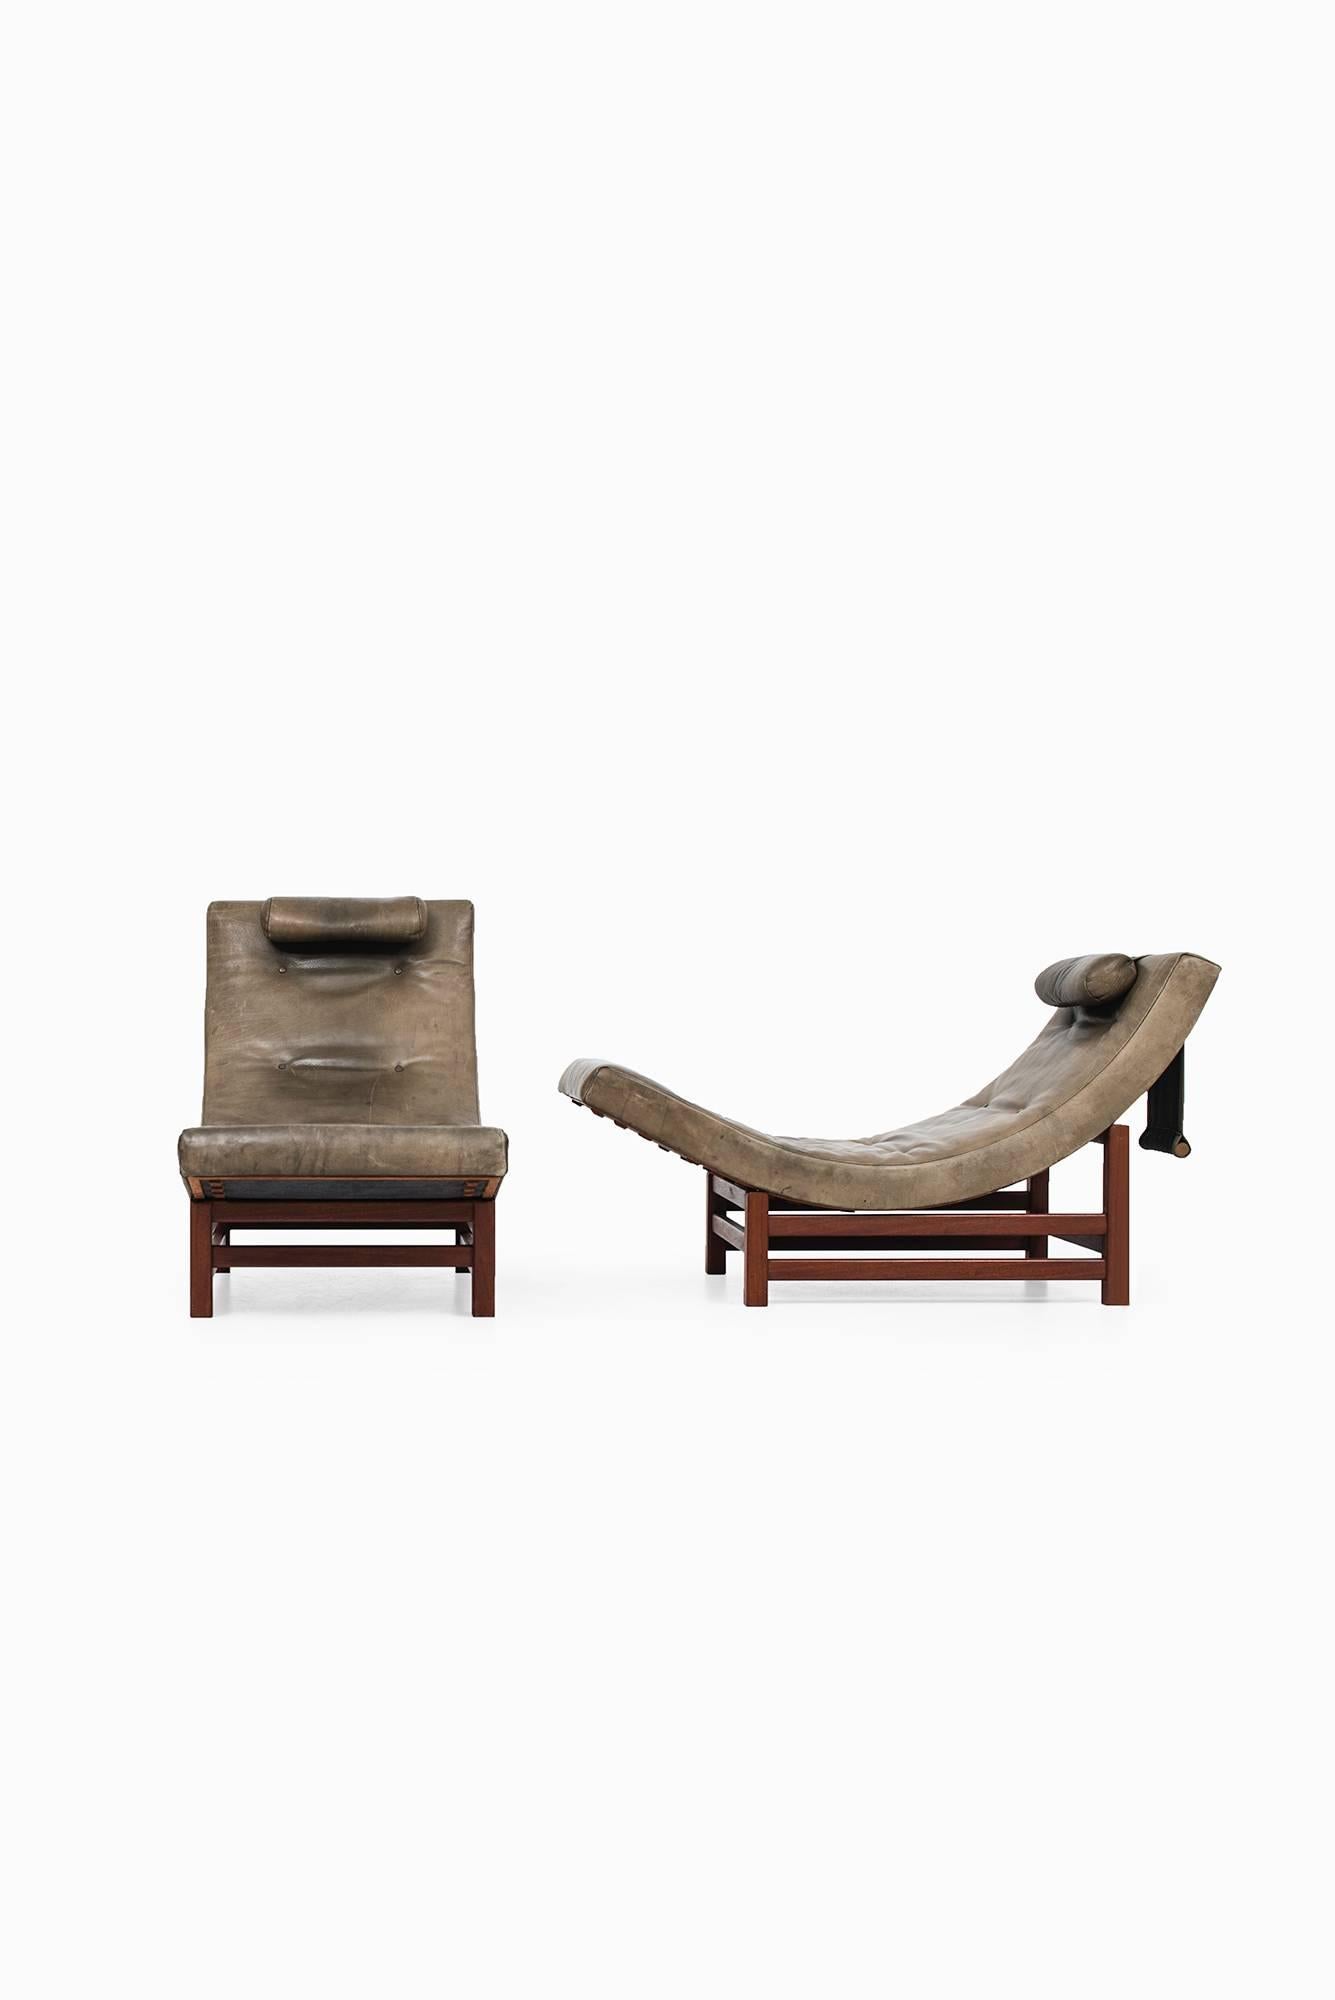 Very rare pair of easy chairs designed by Leo Johansson. Produced by Leo Johansson in Sweden. Upholstered by Gösta Engström in Sweden. Mahogany and original green buffalo leather. Only four pieces made. Adjustable seating part.